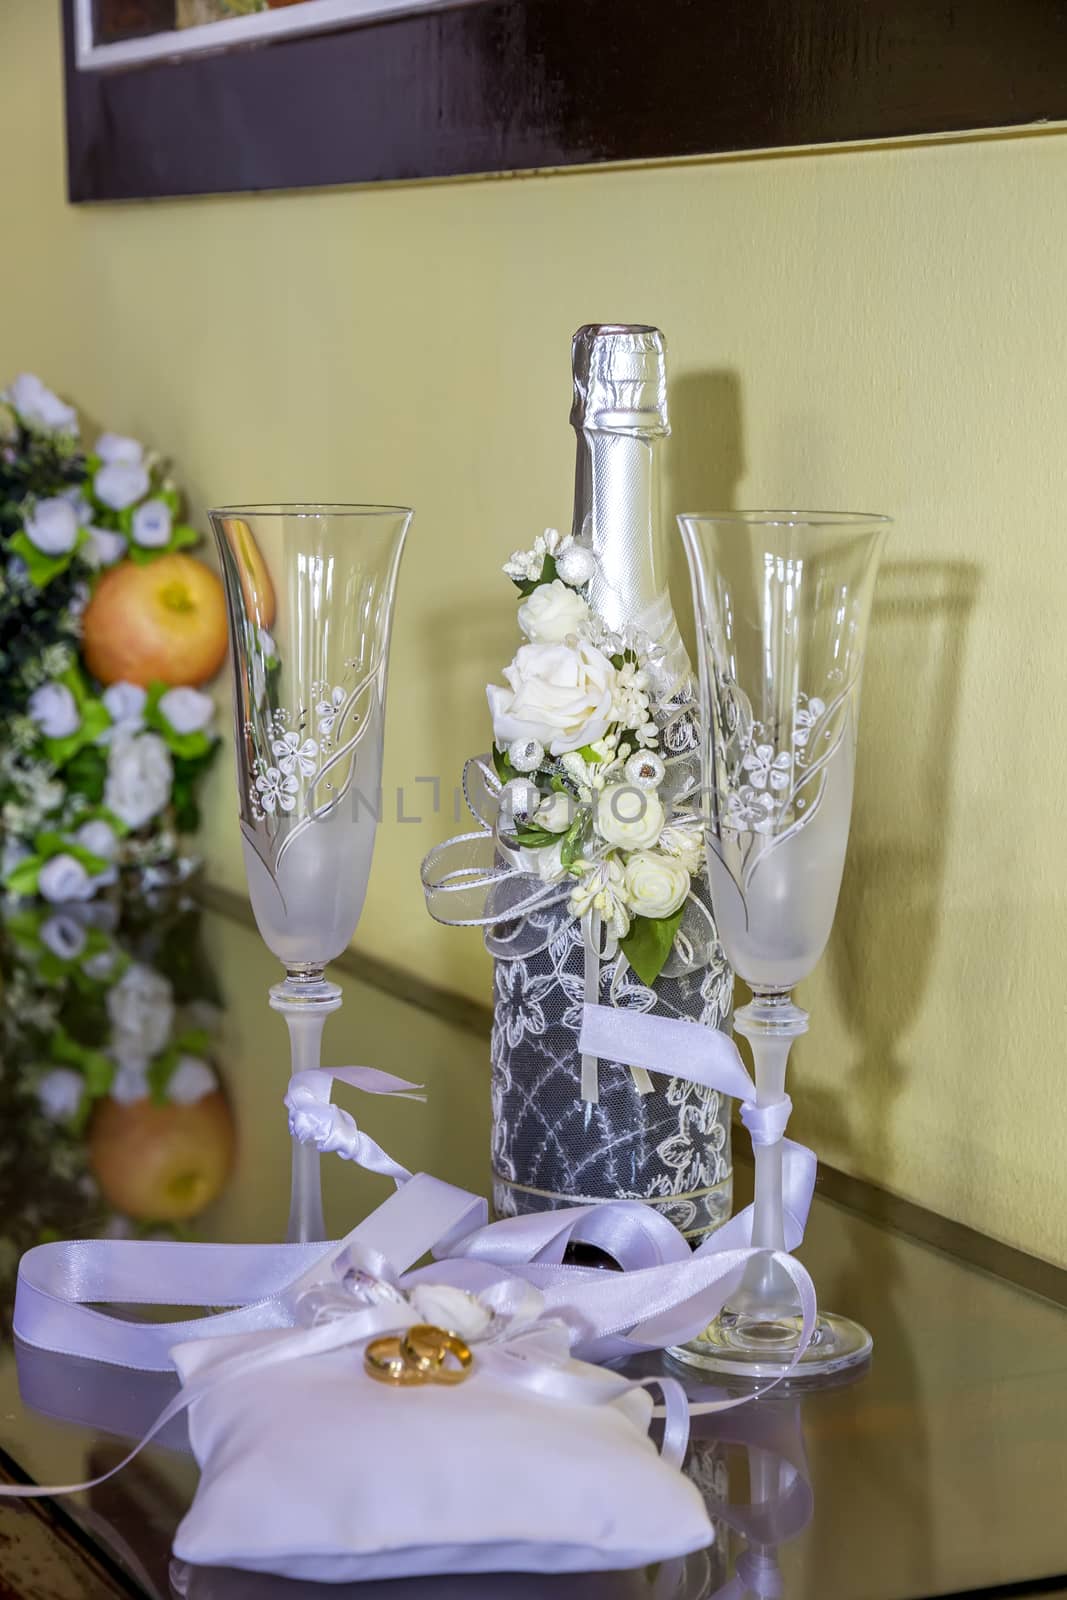 Wedding rings on beautiful pillows against the background of festive wine glasses and champagne. Wedding symbols, attributes.